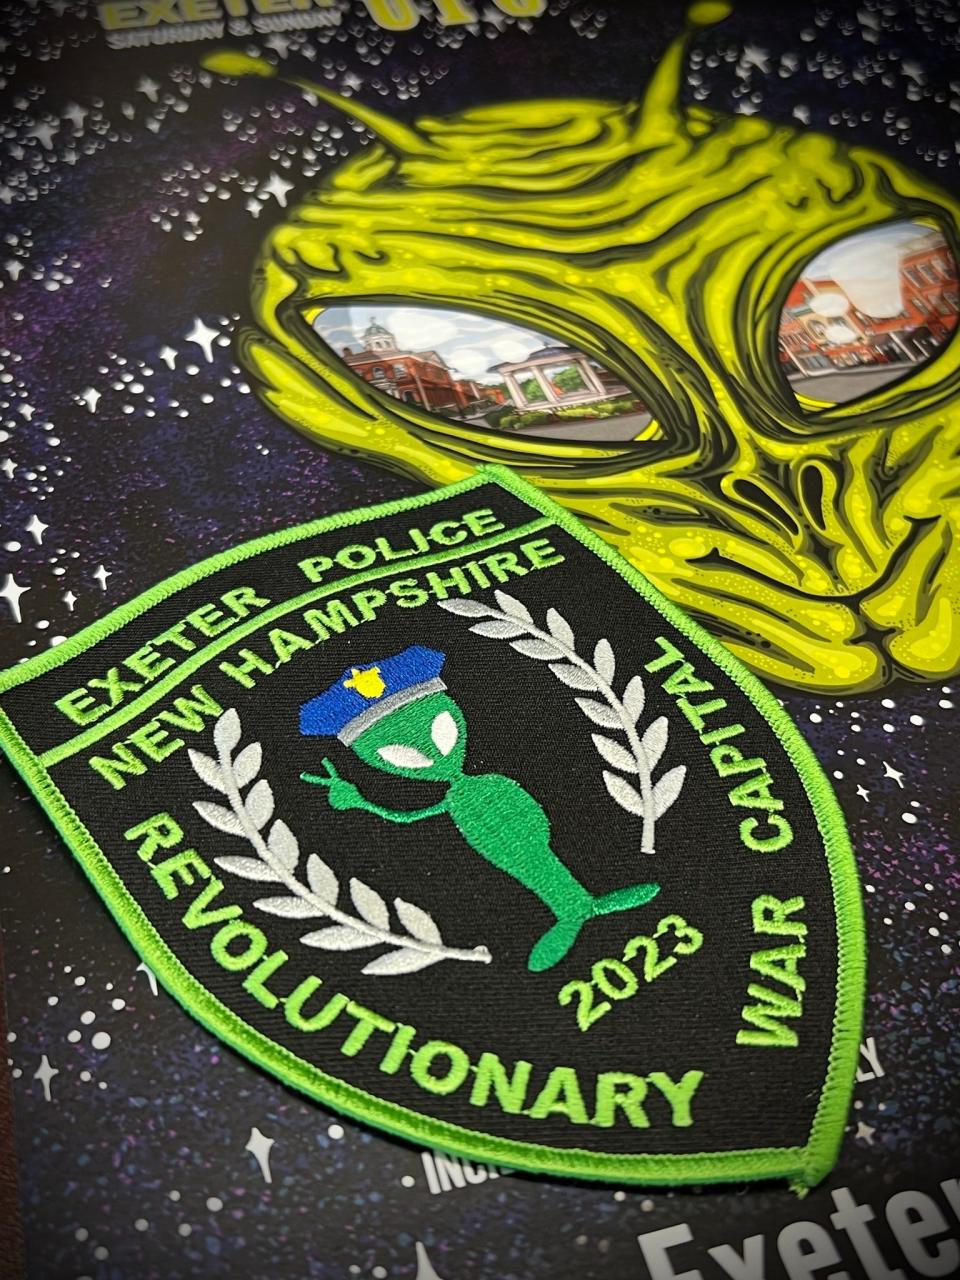 Exeter police will sell a special edition patch at the UFO Festival for $10 on Saturday.